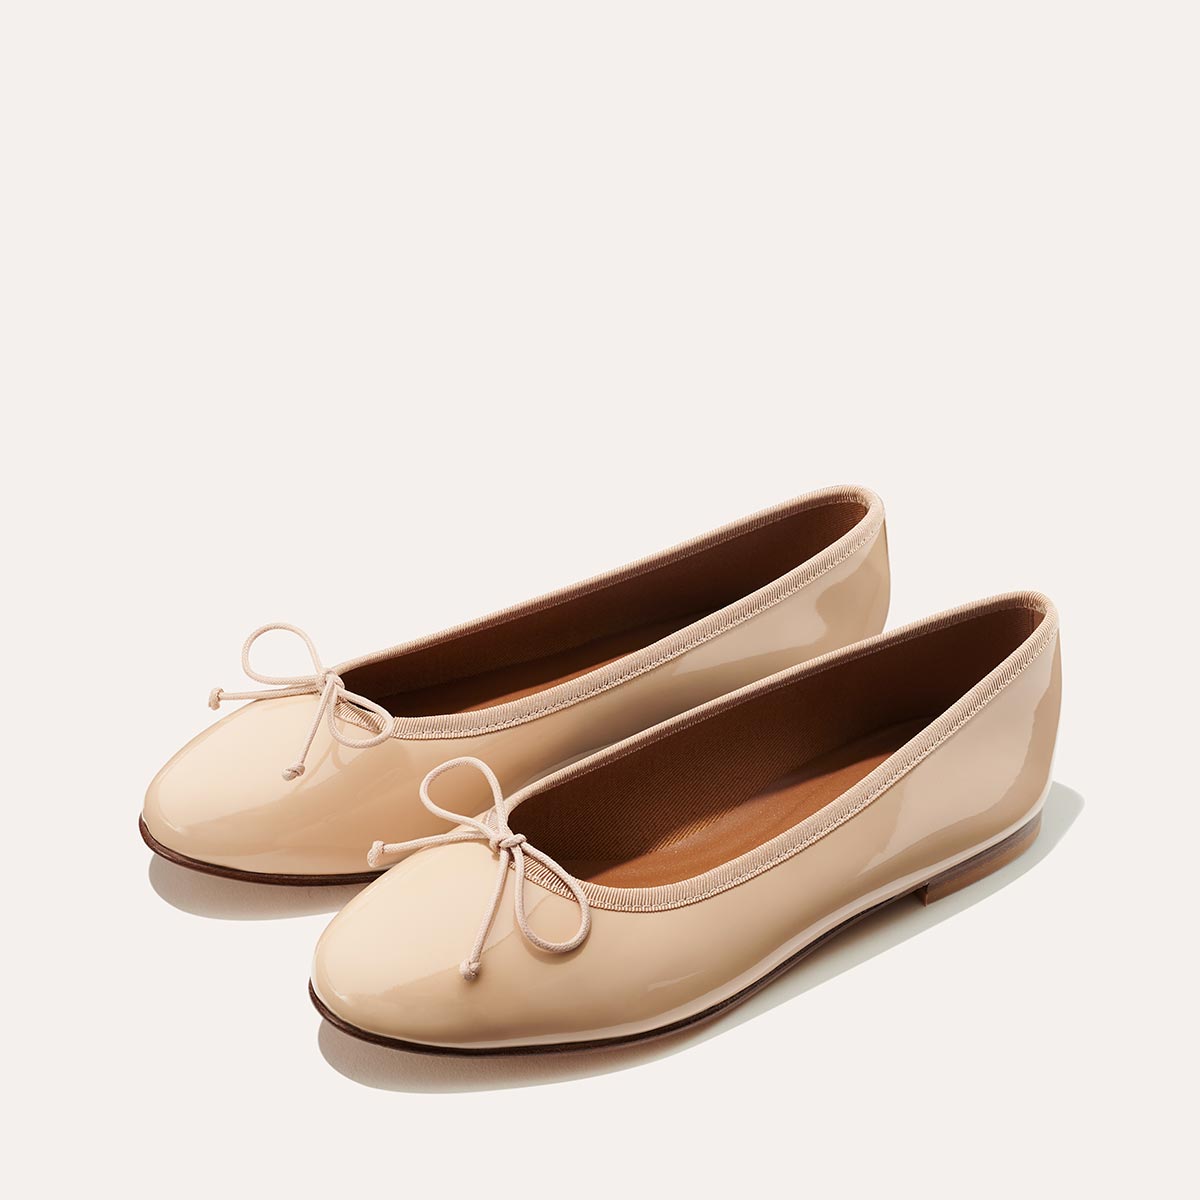 Margaux's classic and comfortable Demi ballet flat, made in a soft, blush Italian patent leather 